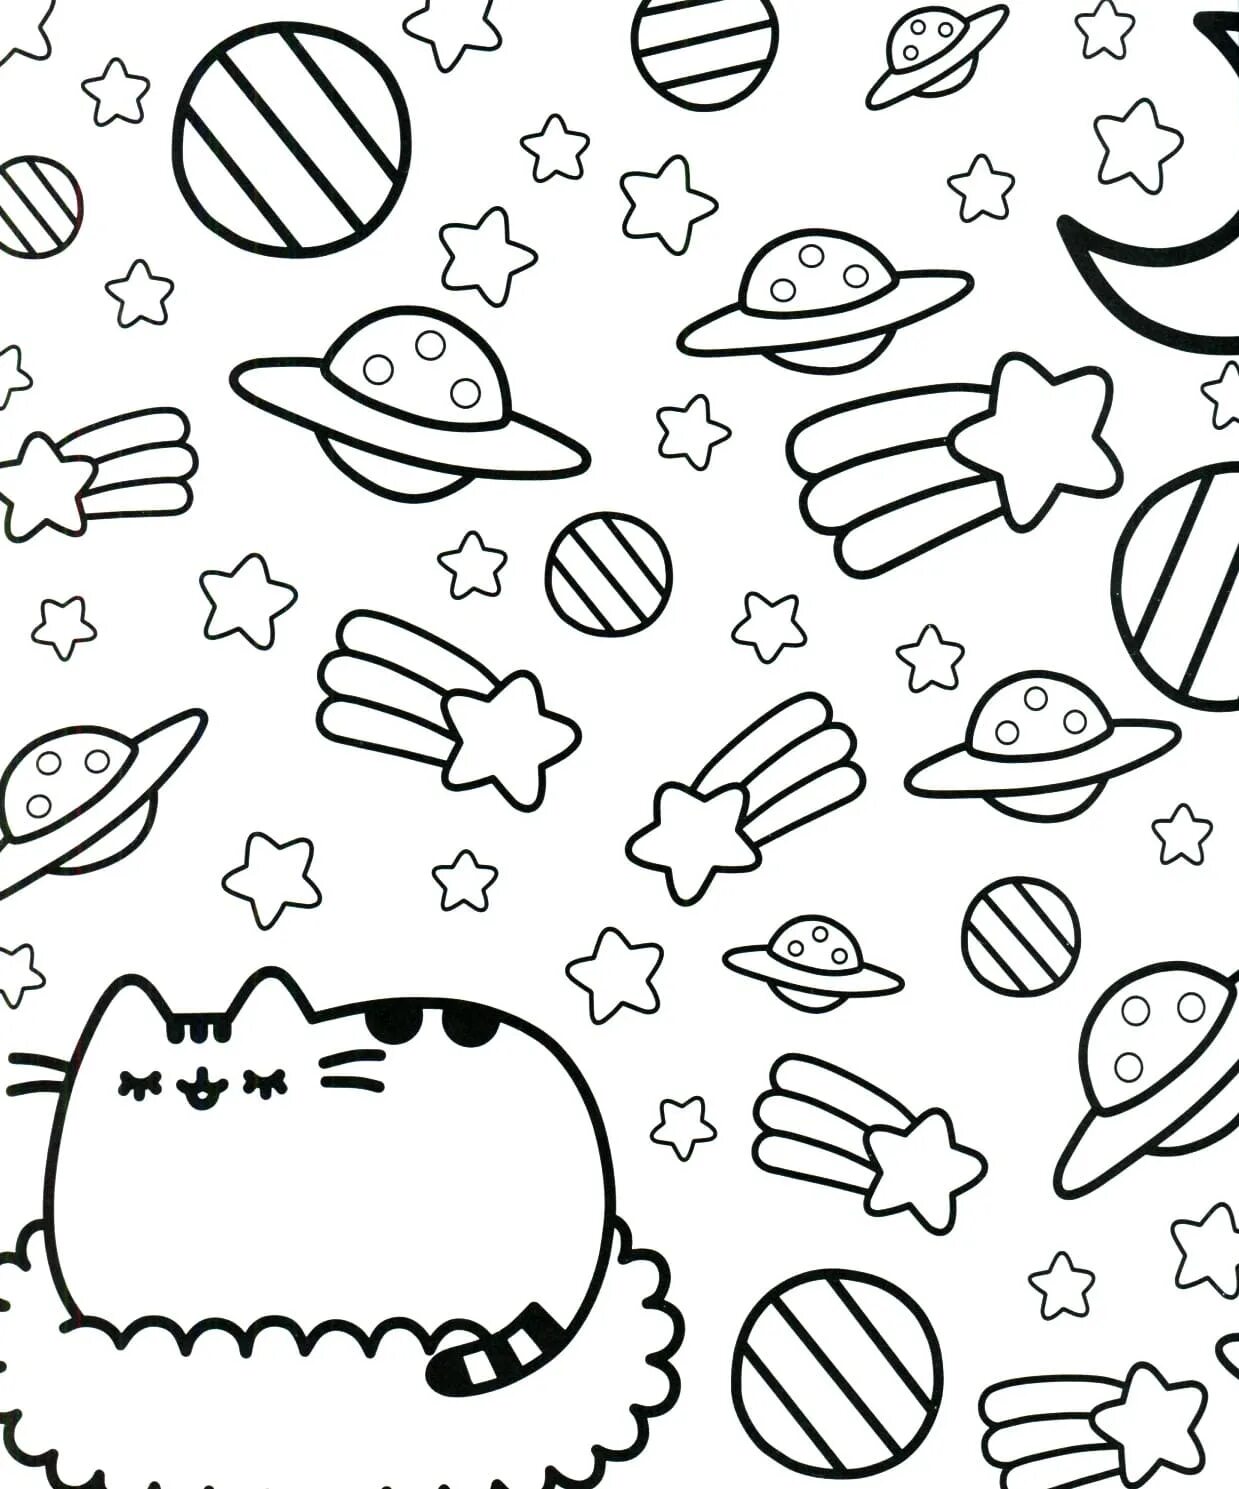 Awesome stickers pusheen coloring